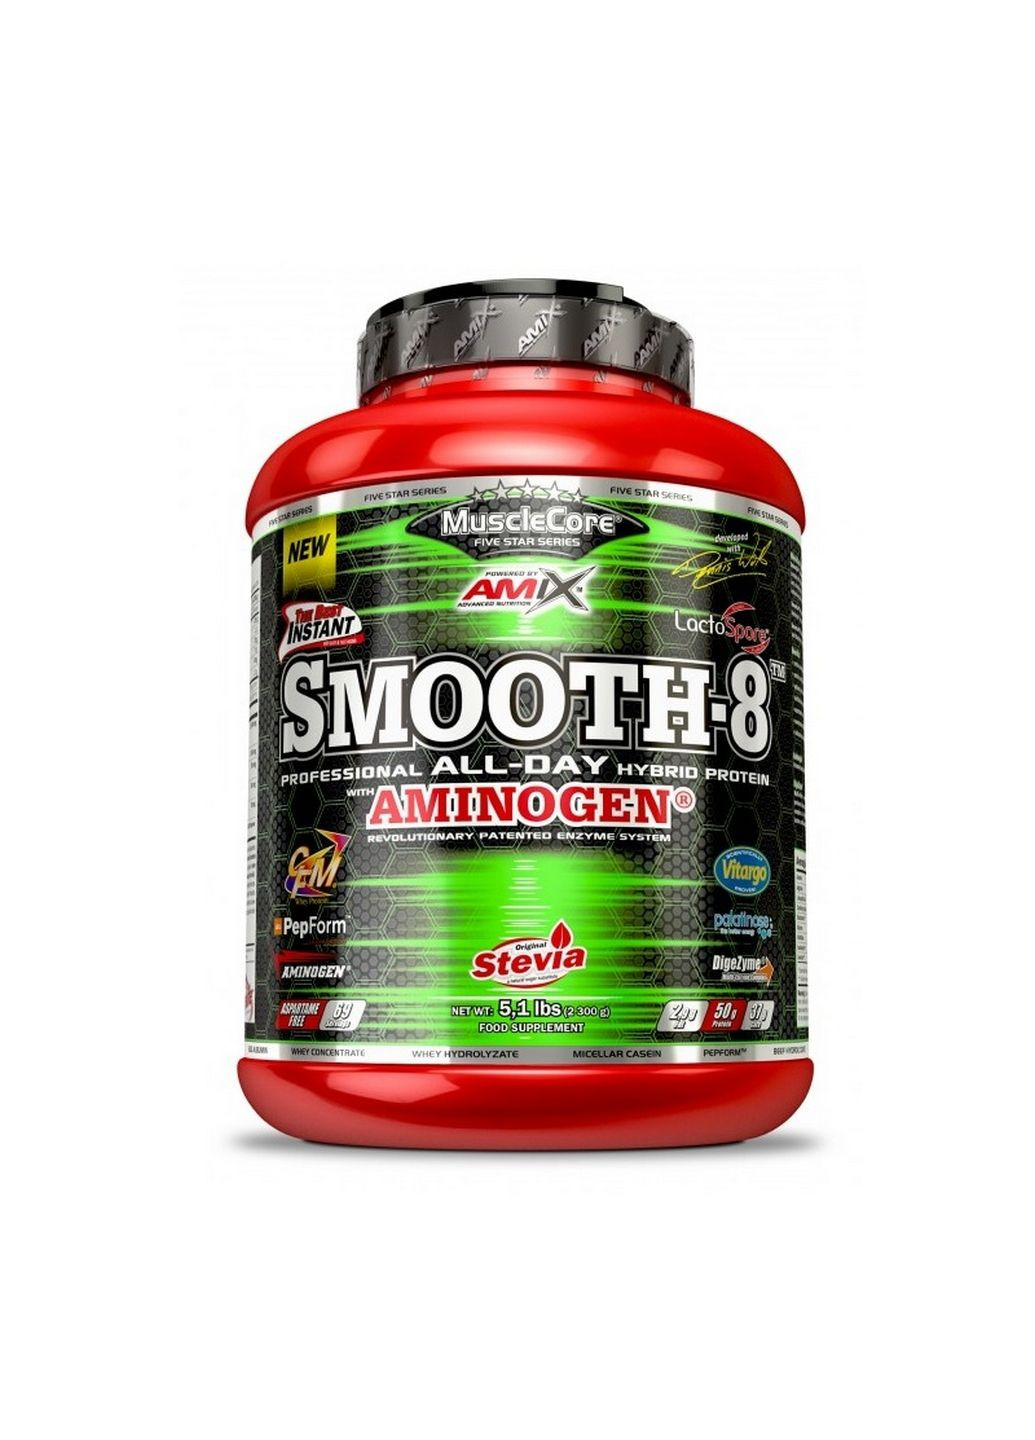 Протеин Nutrition MuscleCore Smooth-8 Protein, 2.3 кг Шоколад Amix Nutrition (293479675)